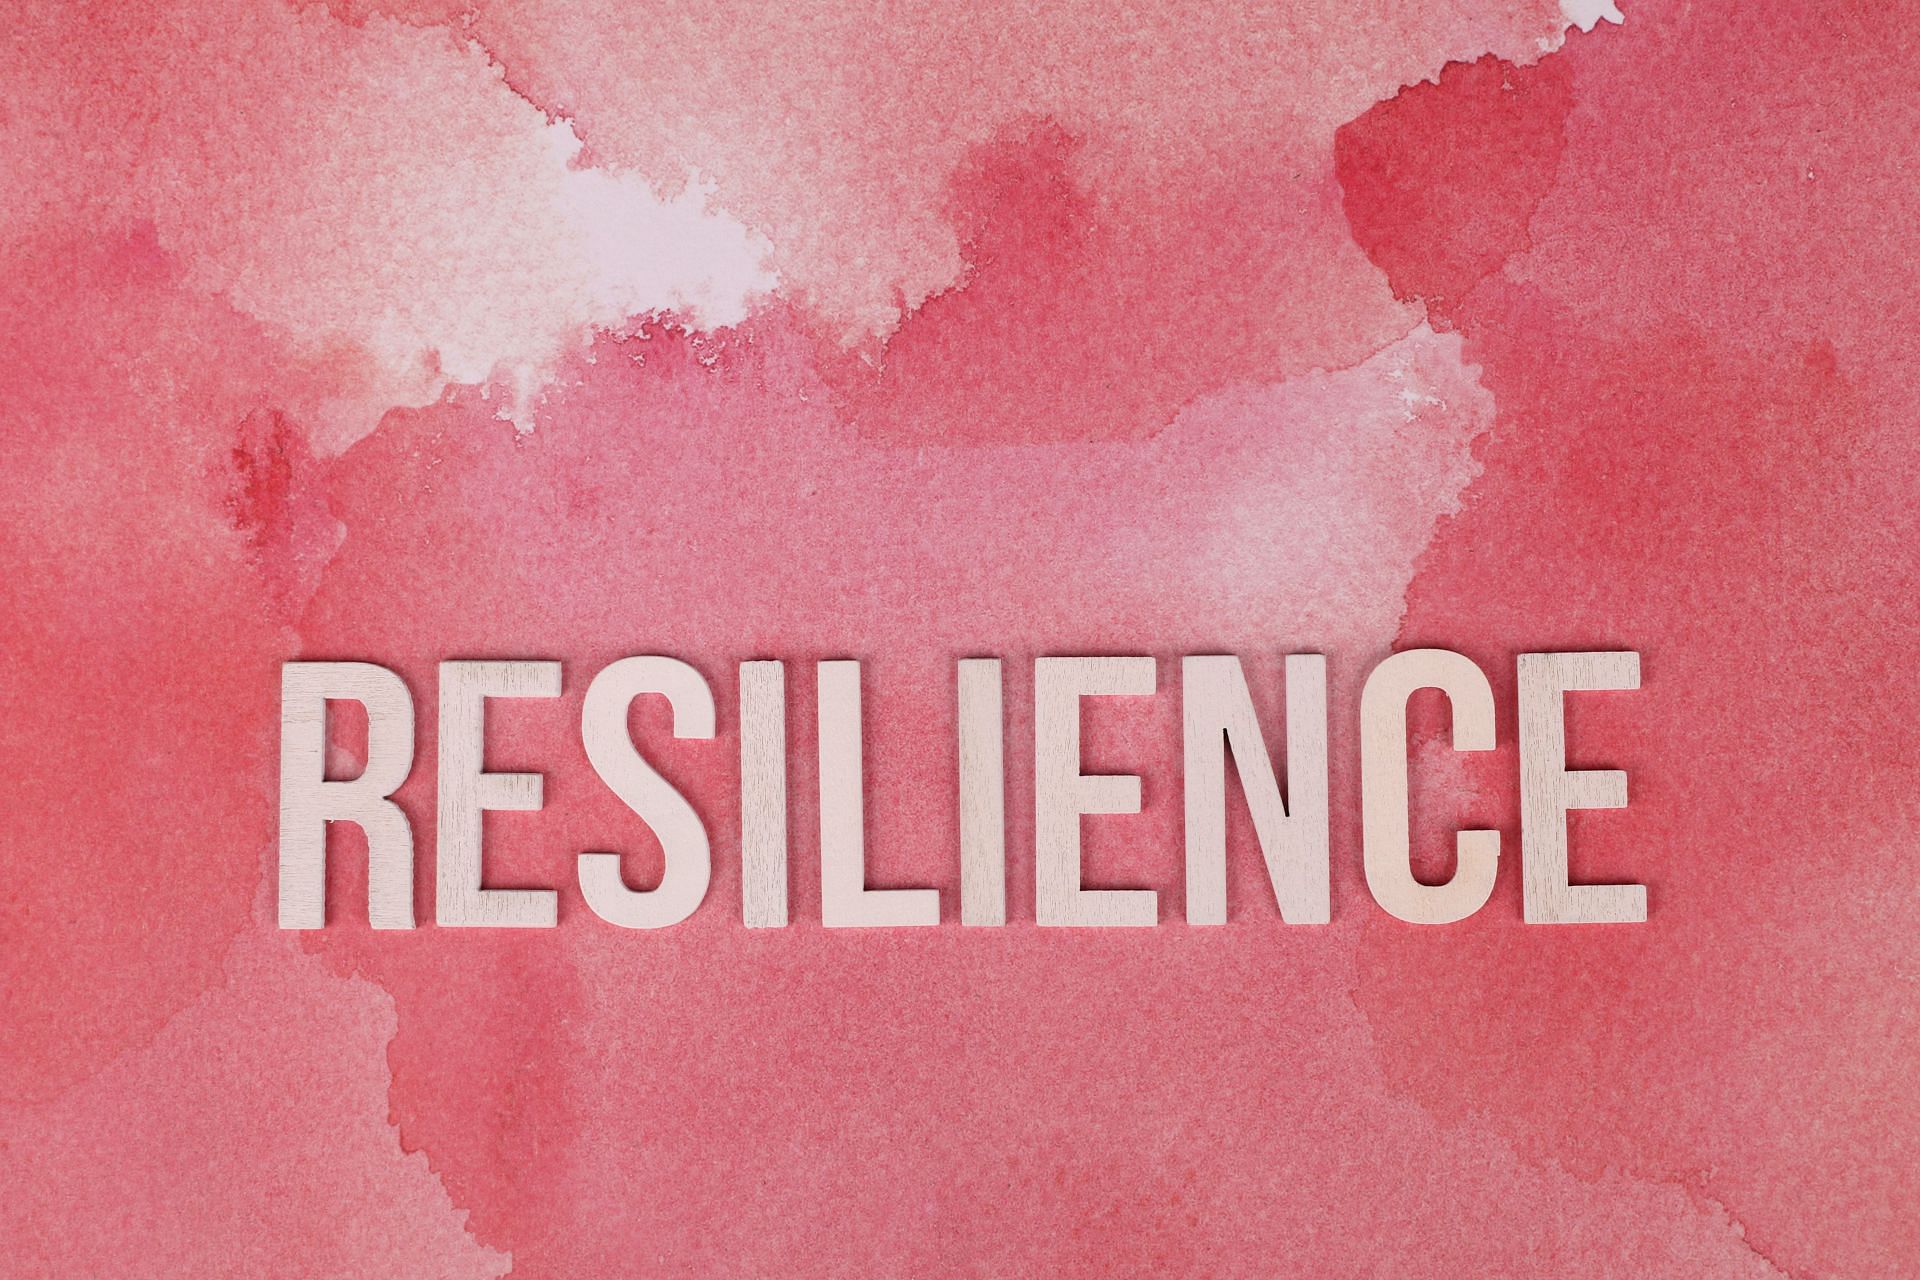 Resilience can be influenced by positive thinking. (Photo via Pexels/ Ann H)